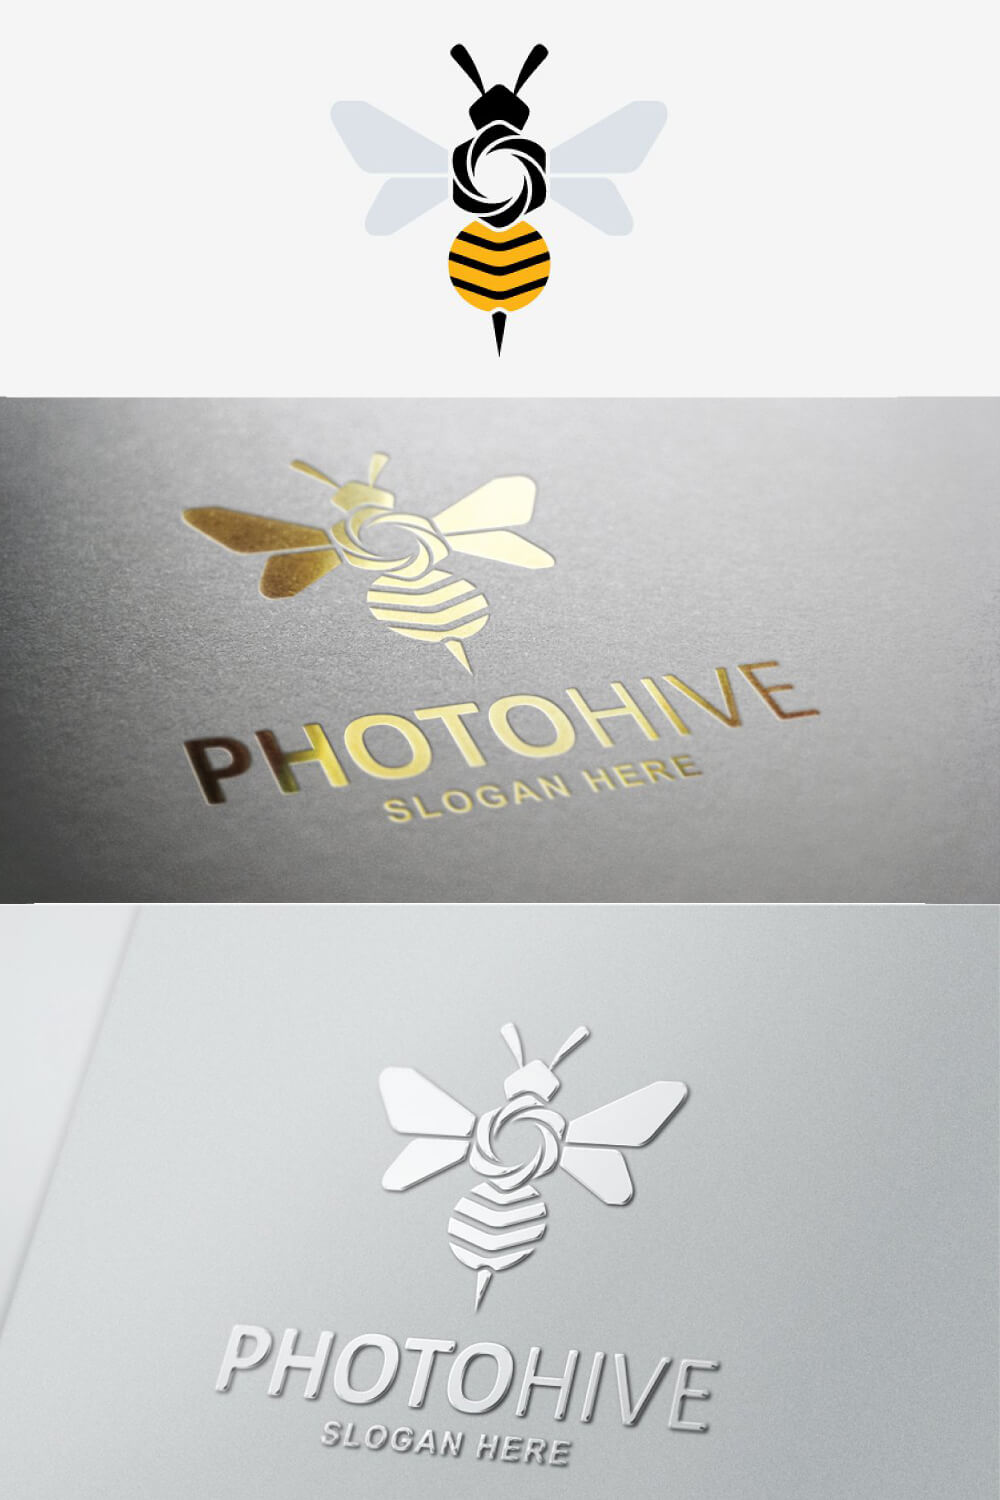 Metal bee logos on a gray background.